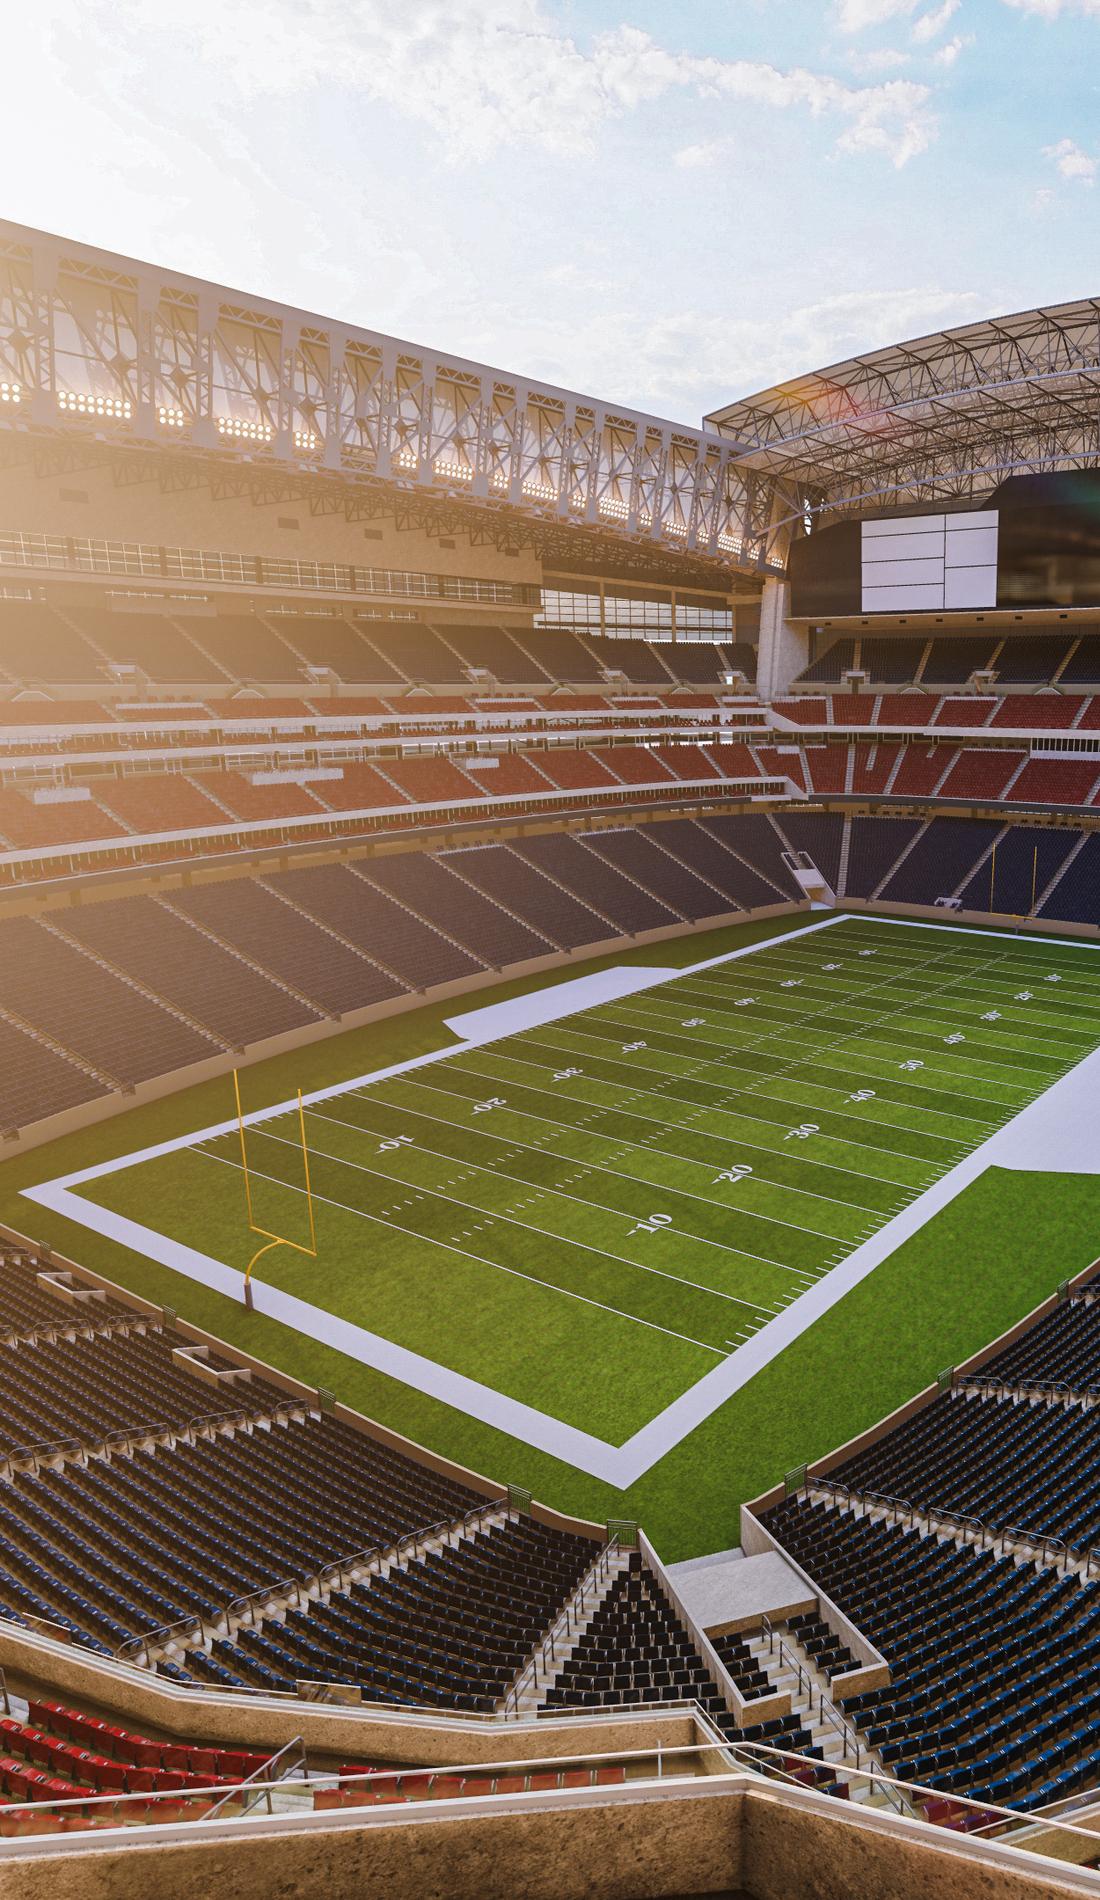 How To Find The Cheapest Houston Texans Playoff Tickets 2022!